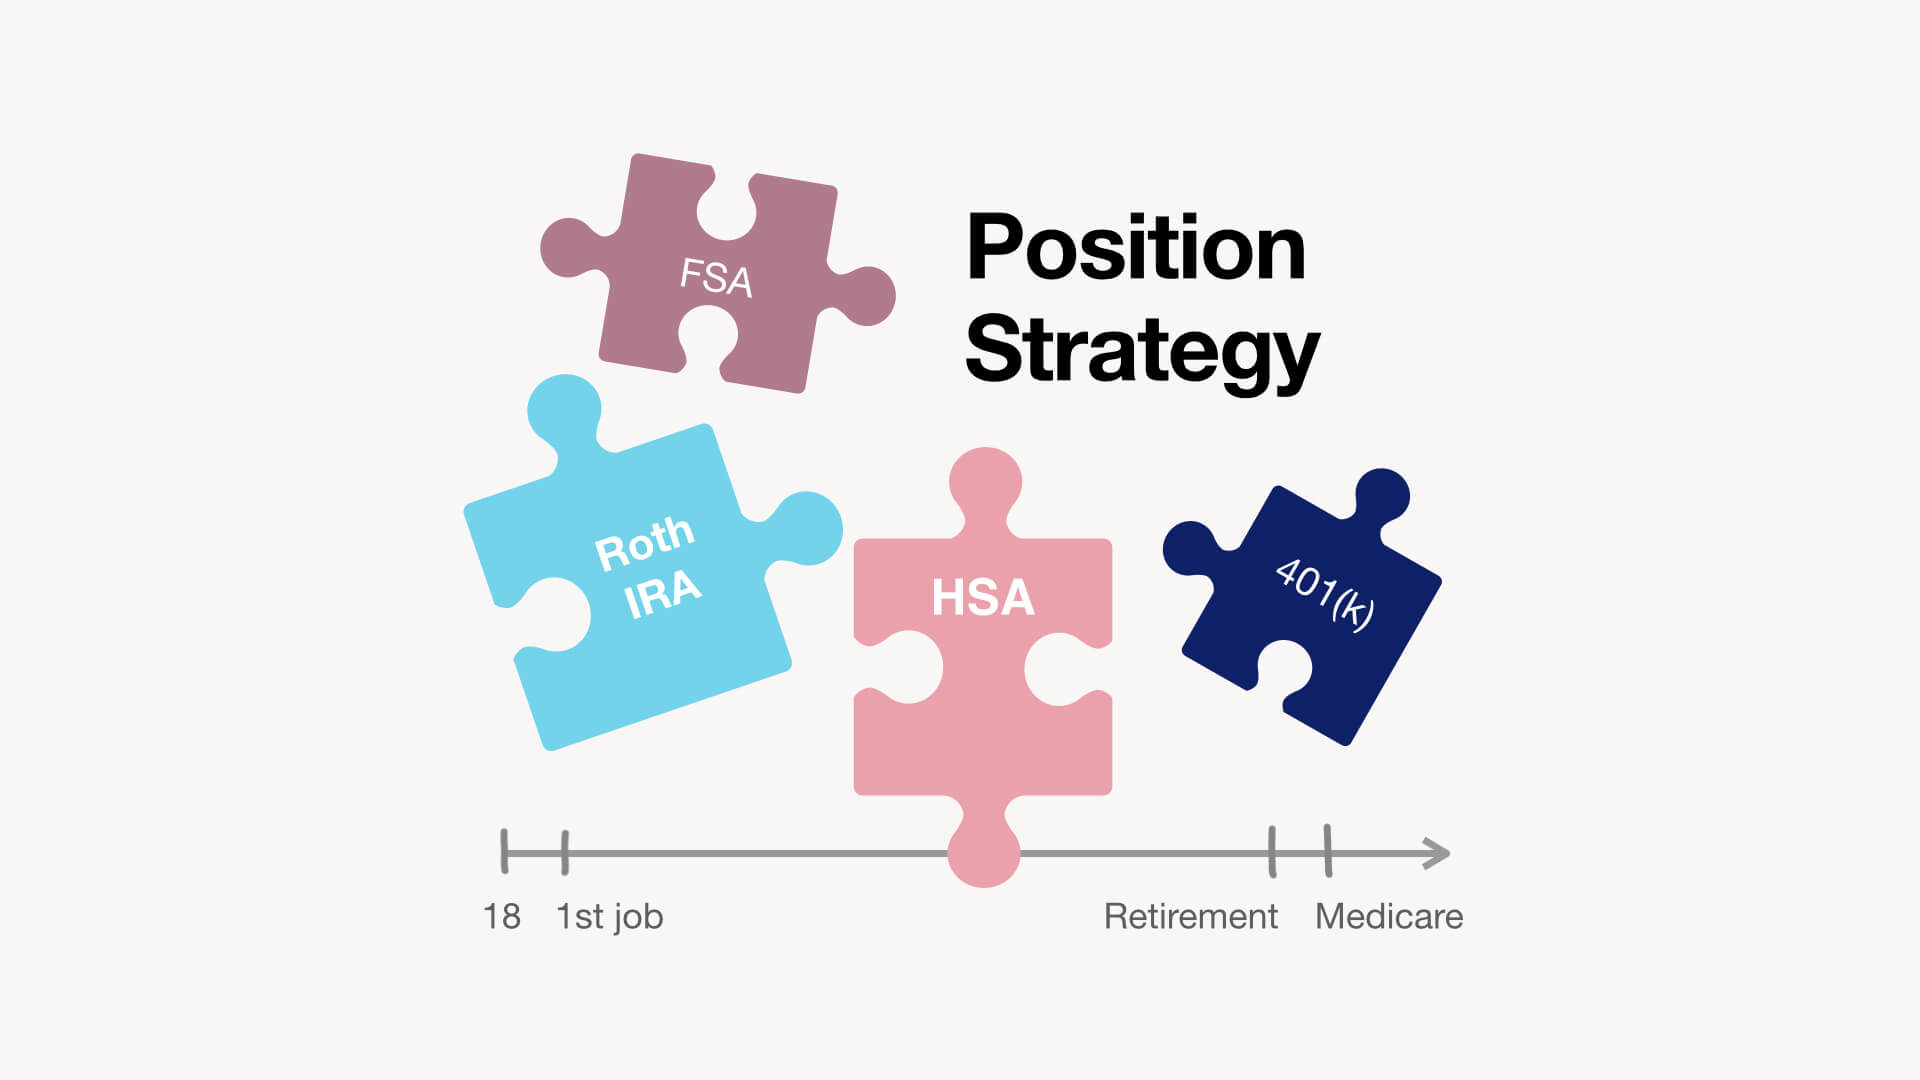 most powerful retirement account positioning strategy for Roth IRA, HSA, FSA, 401(k) in lifecycle